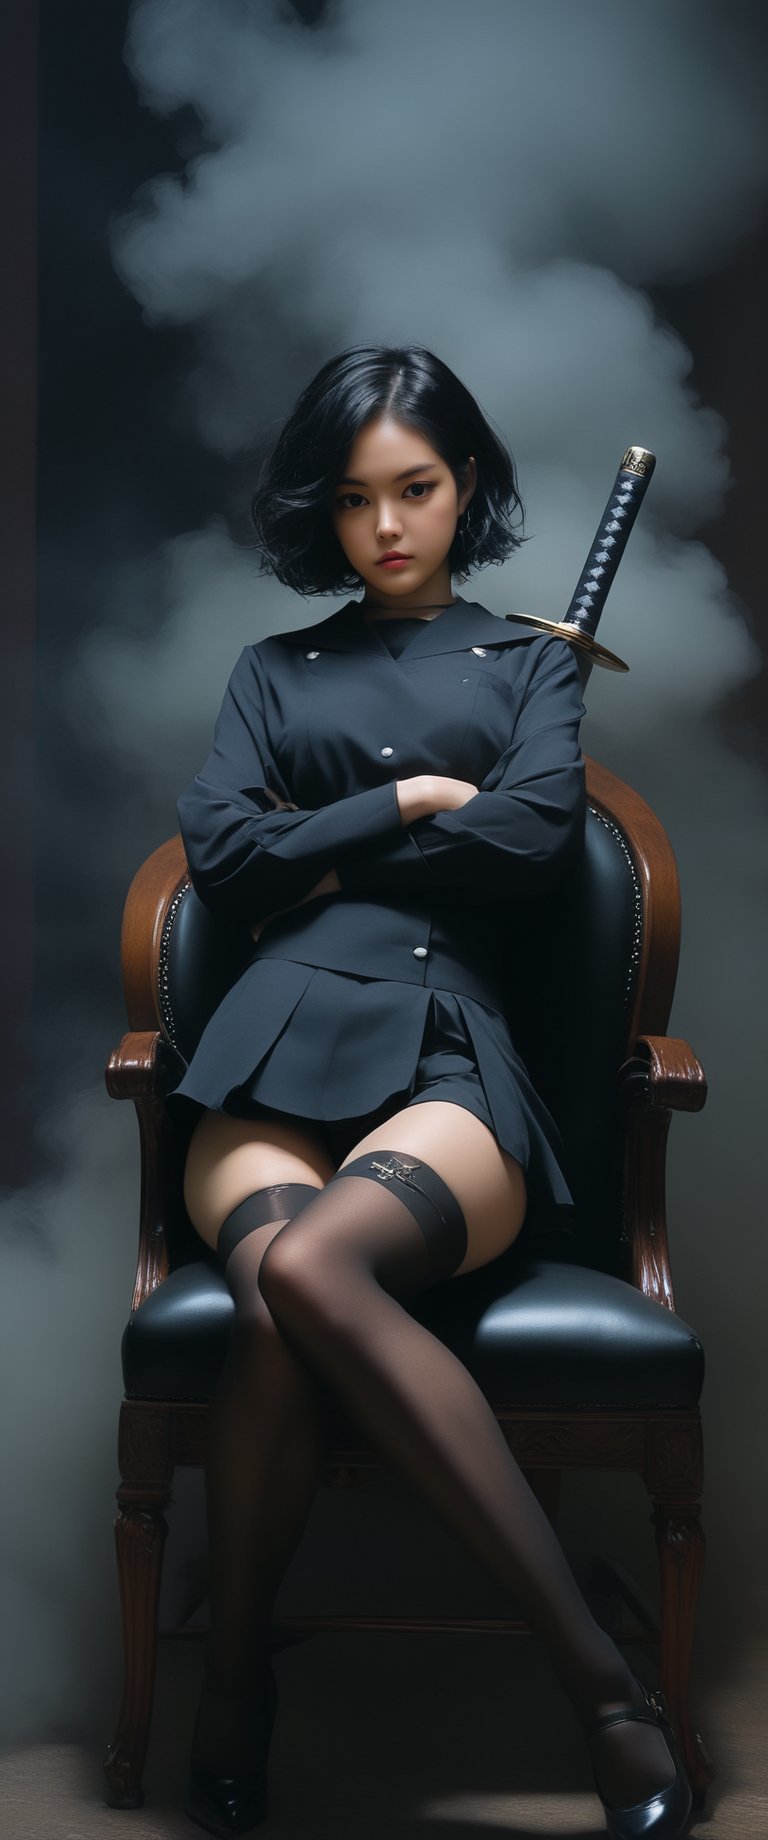 1 woman, black sailor school uniform, sitting in a chair holding a sword, short hair, masterpiece, absurdes, chiarosaurio, mucha, sexy pose, tense athmosfere, detailed background,Short skirt with white over-the-knee stockings, garter belt on calf, sensual and sexy, cyberpunk new tokyo yakuza ambient background with ambient smoke, inside, ct-fujiii,ct-jeniiii